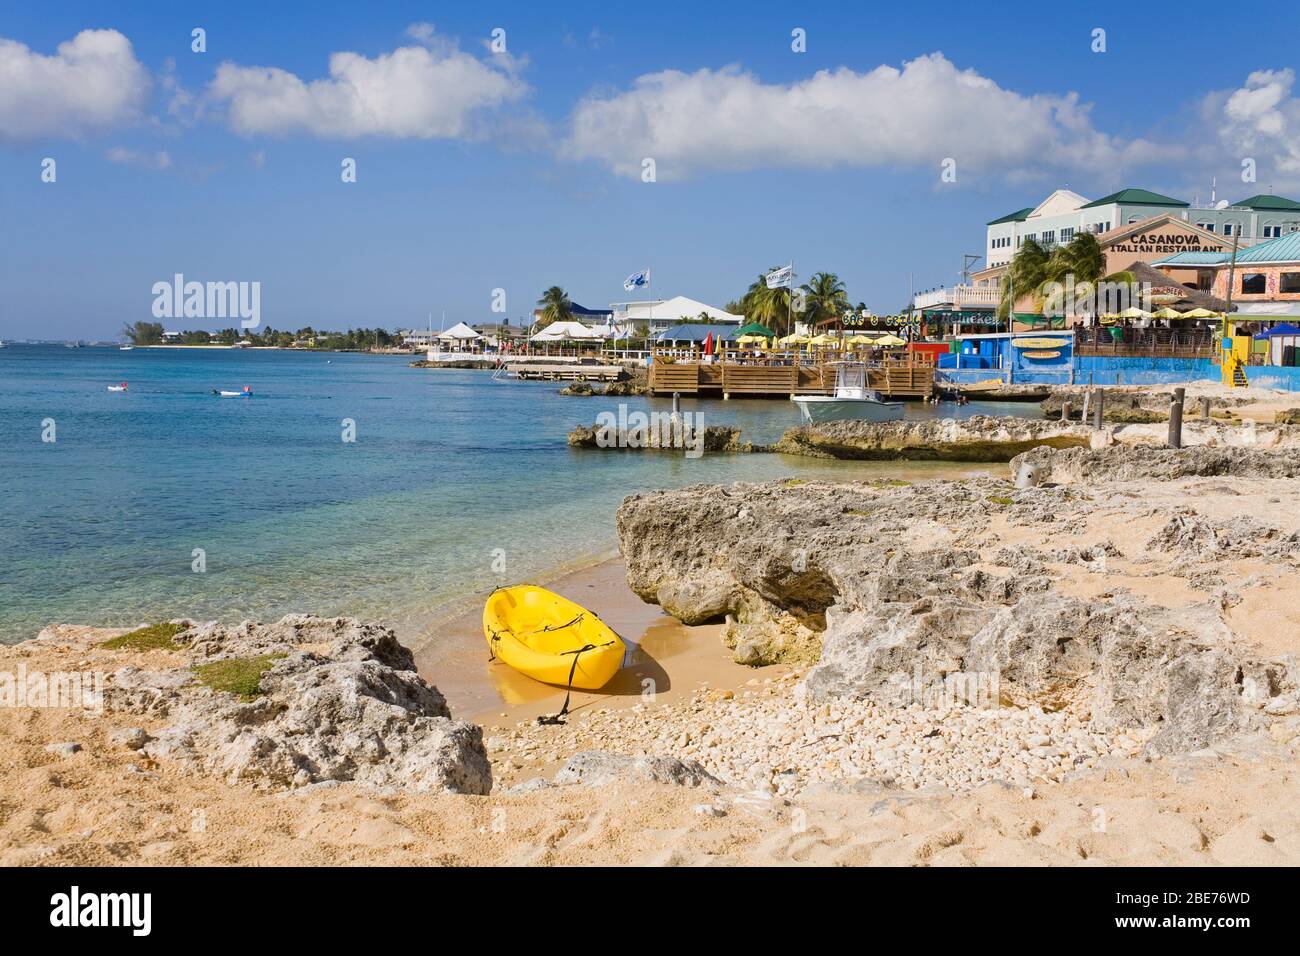 Kayak on beach in George Town, Grand Cayman, Cayman Islands, Greater Antilles, Caribbean Stock Photo